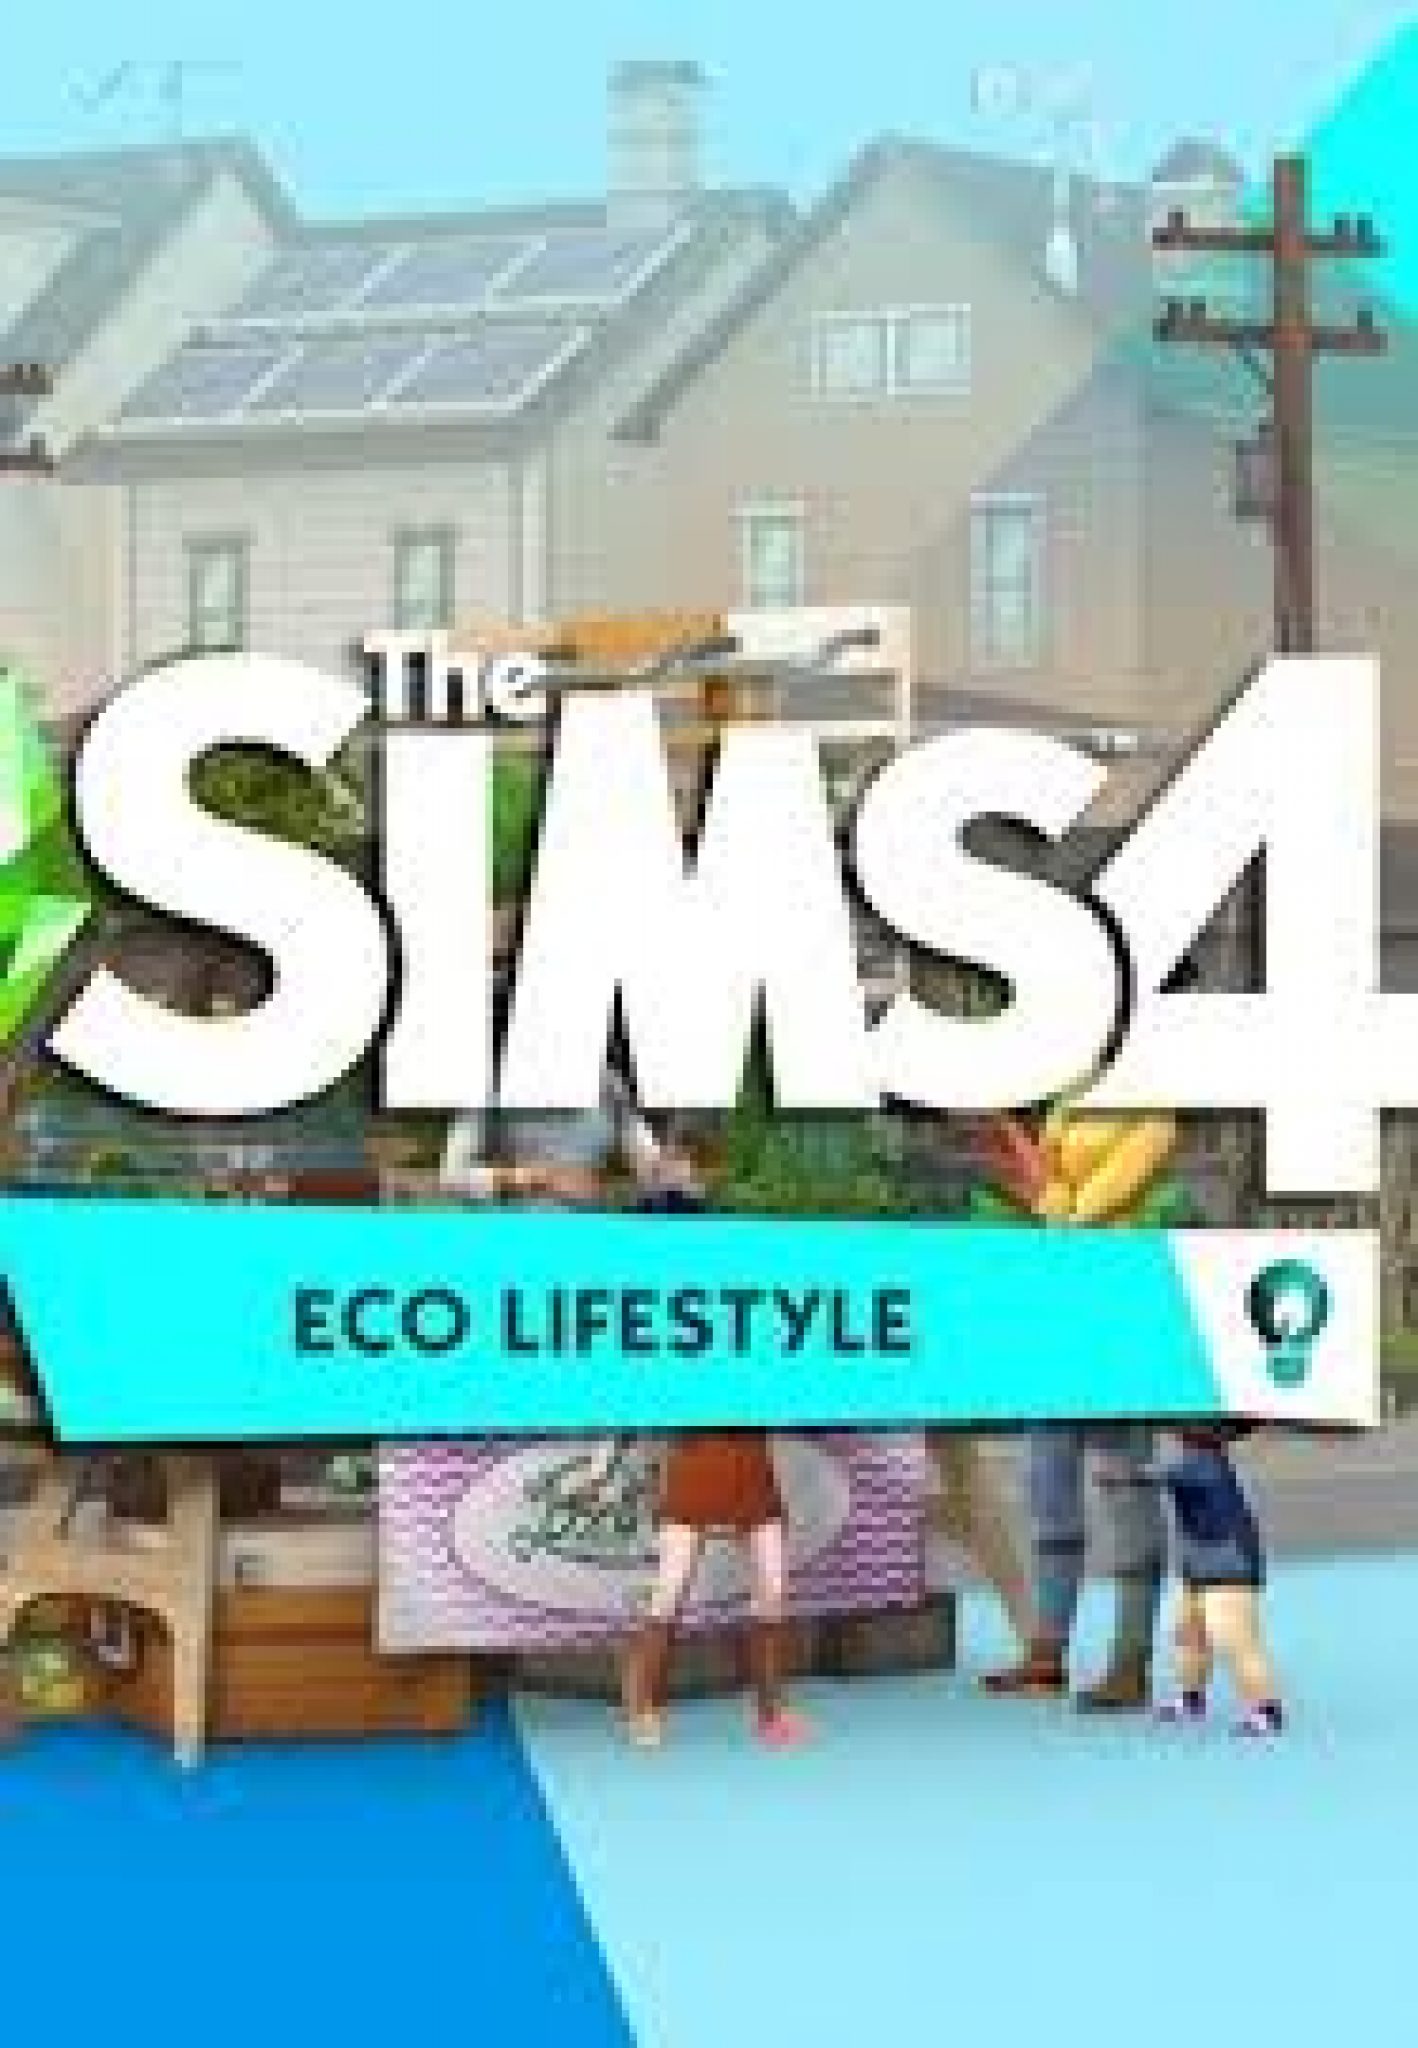 Sims 4 download free